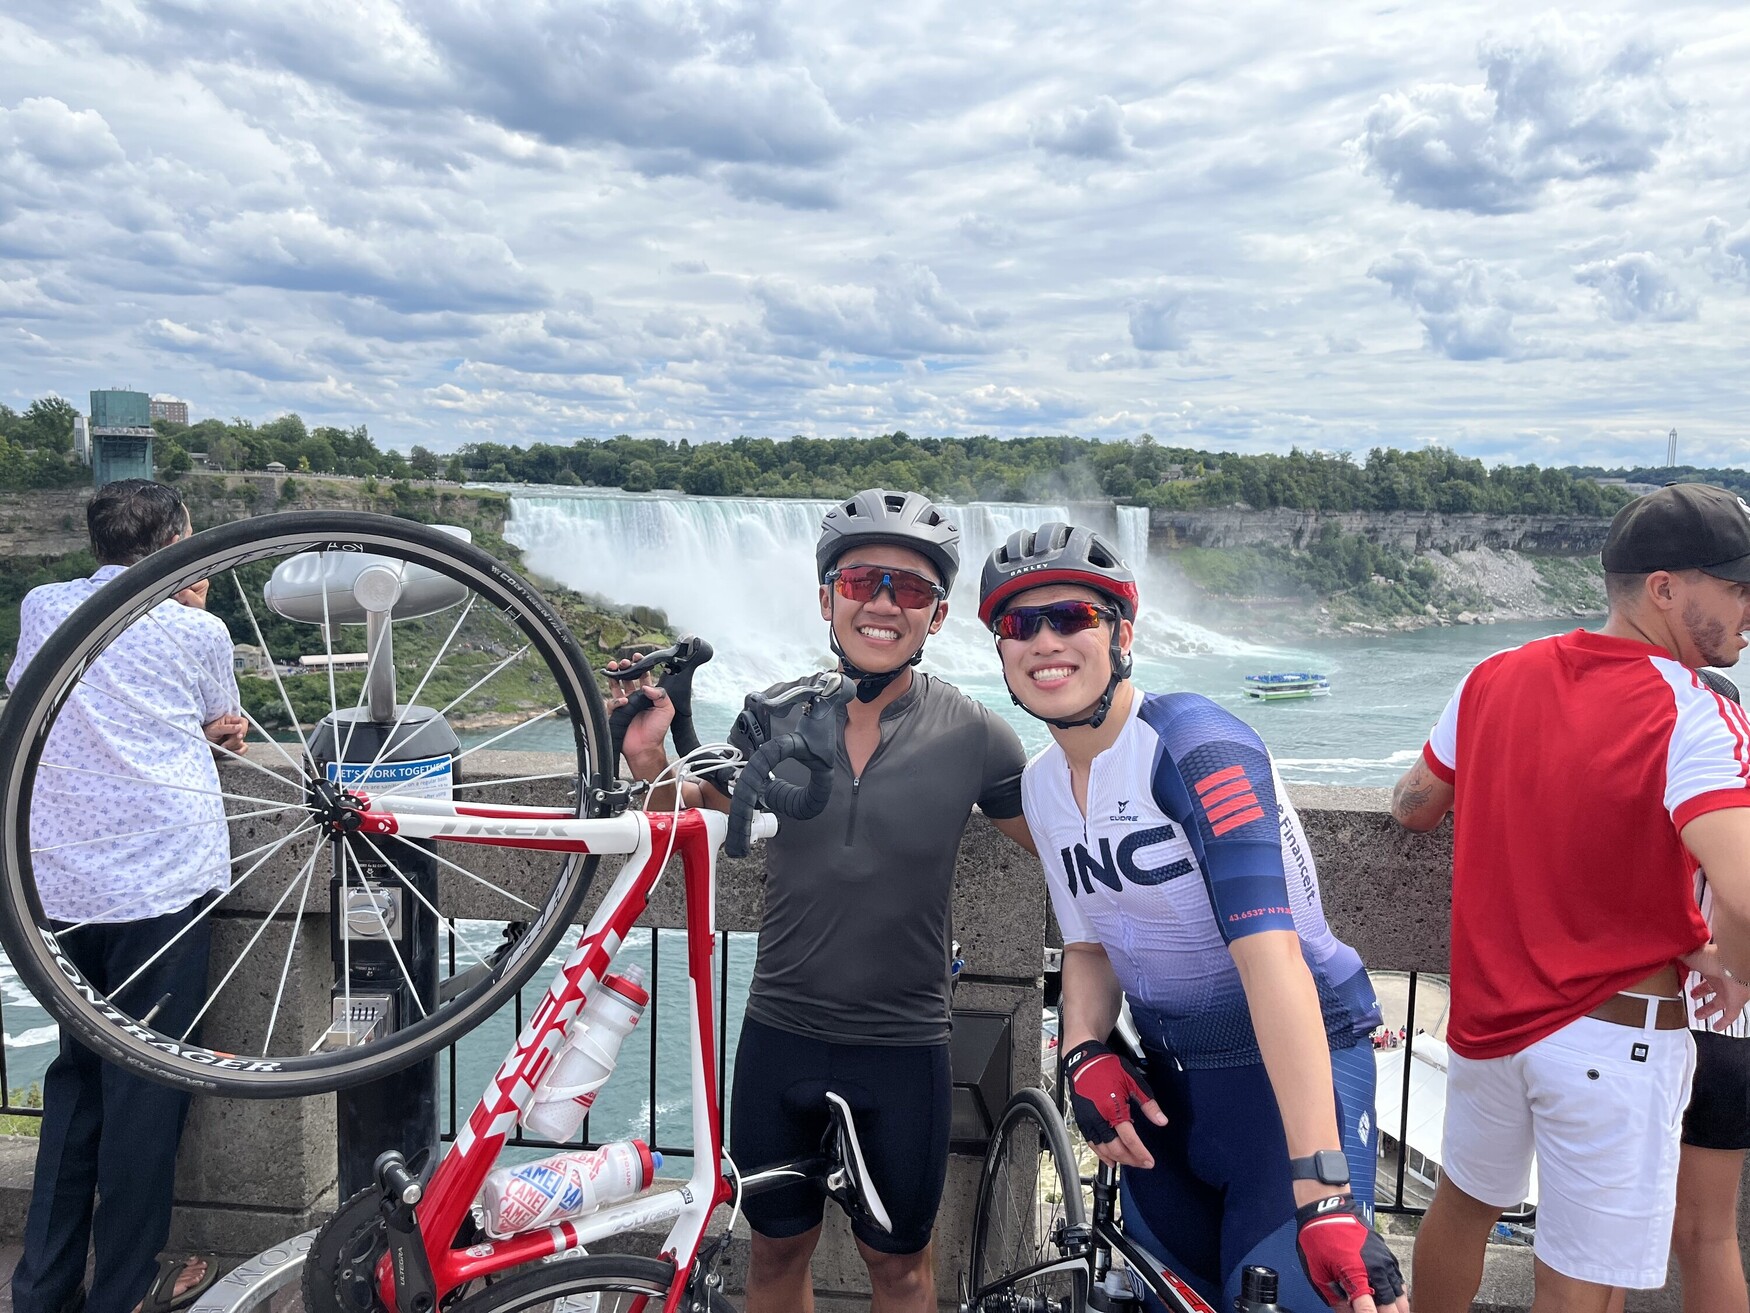 Members of the Toronto Anesthesia Cycling Club